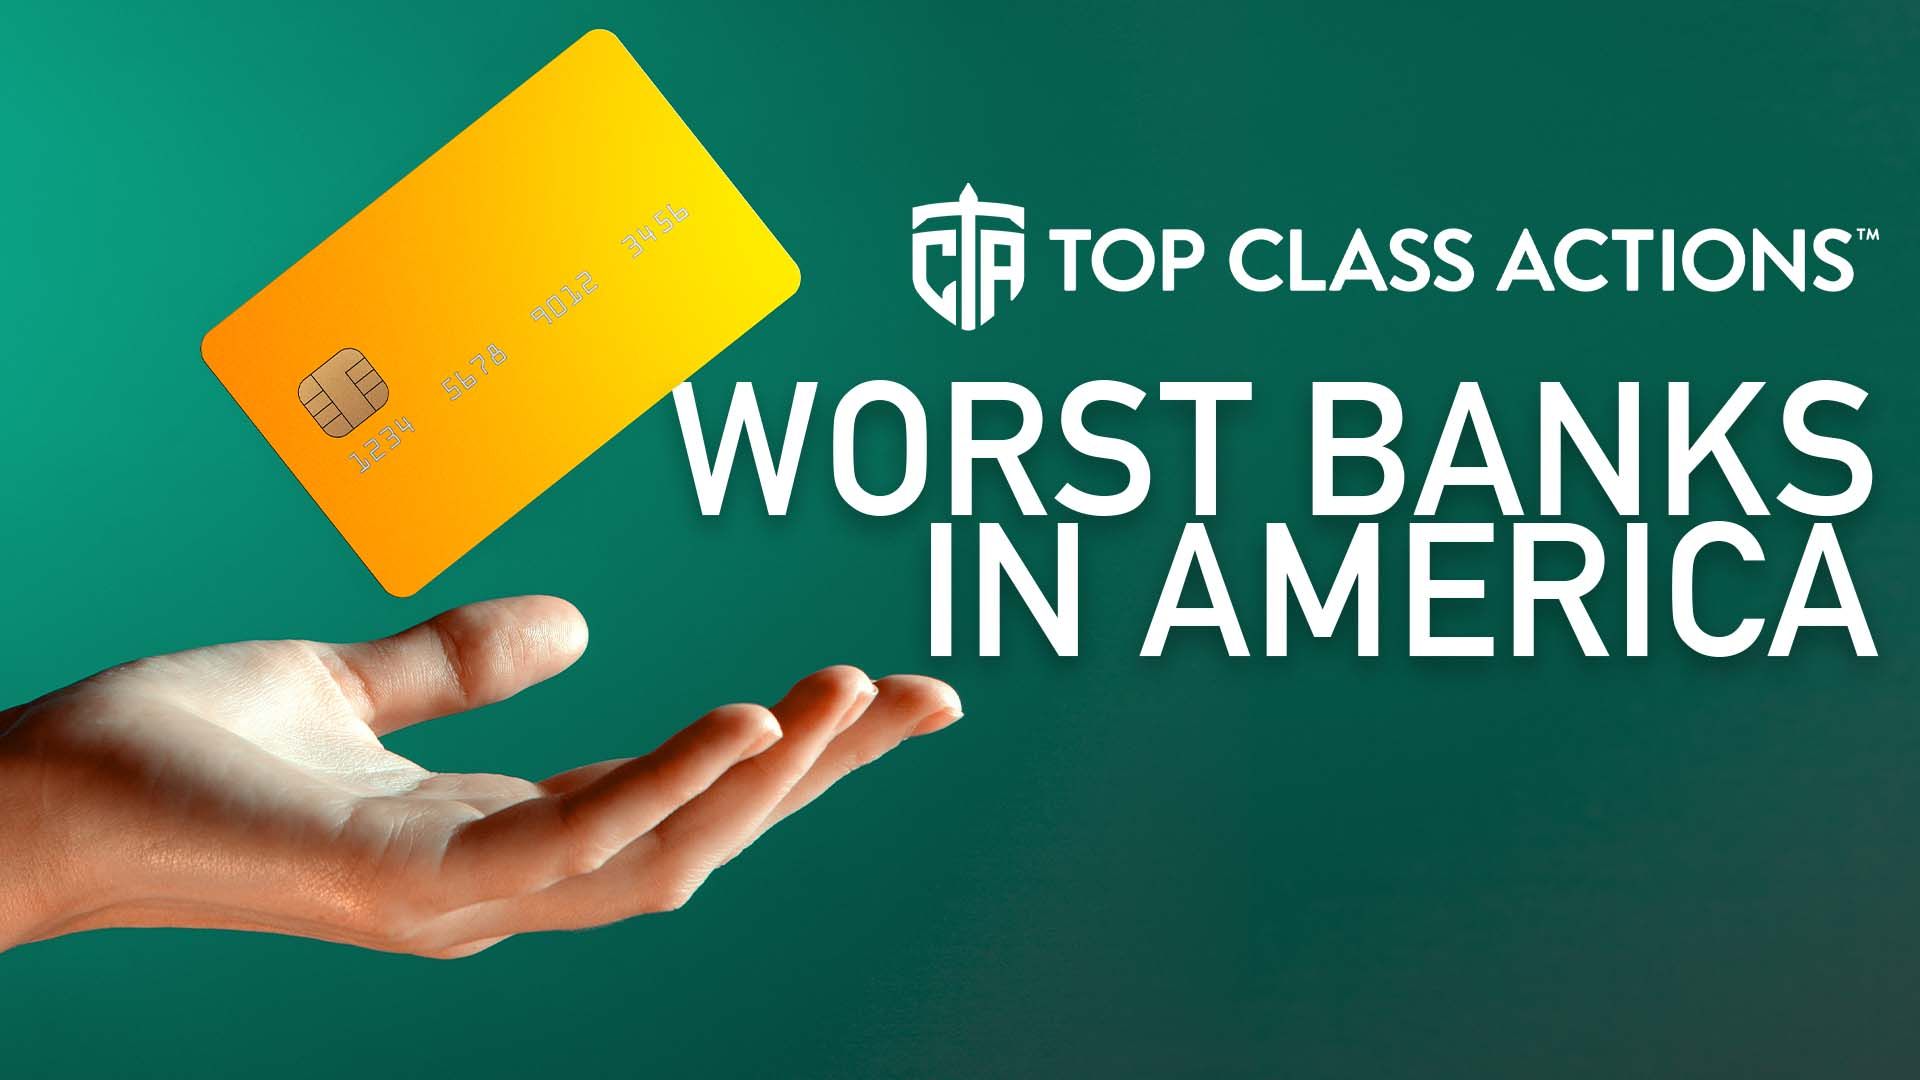 According to Class Action Lawsuits, These Are The Worst Banks in